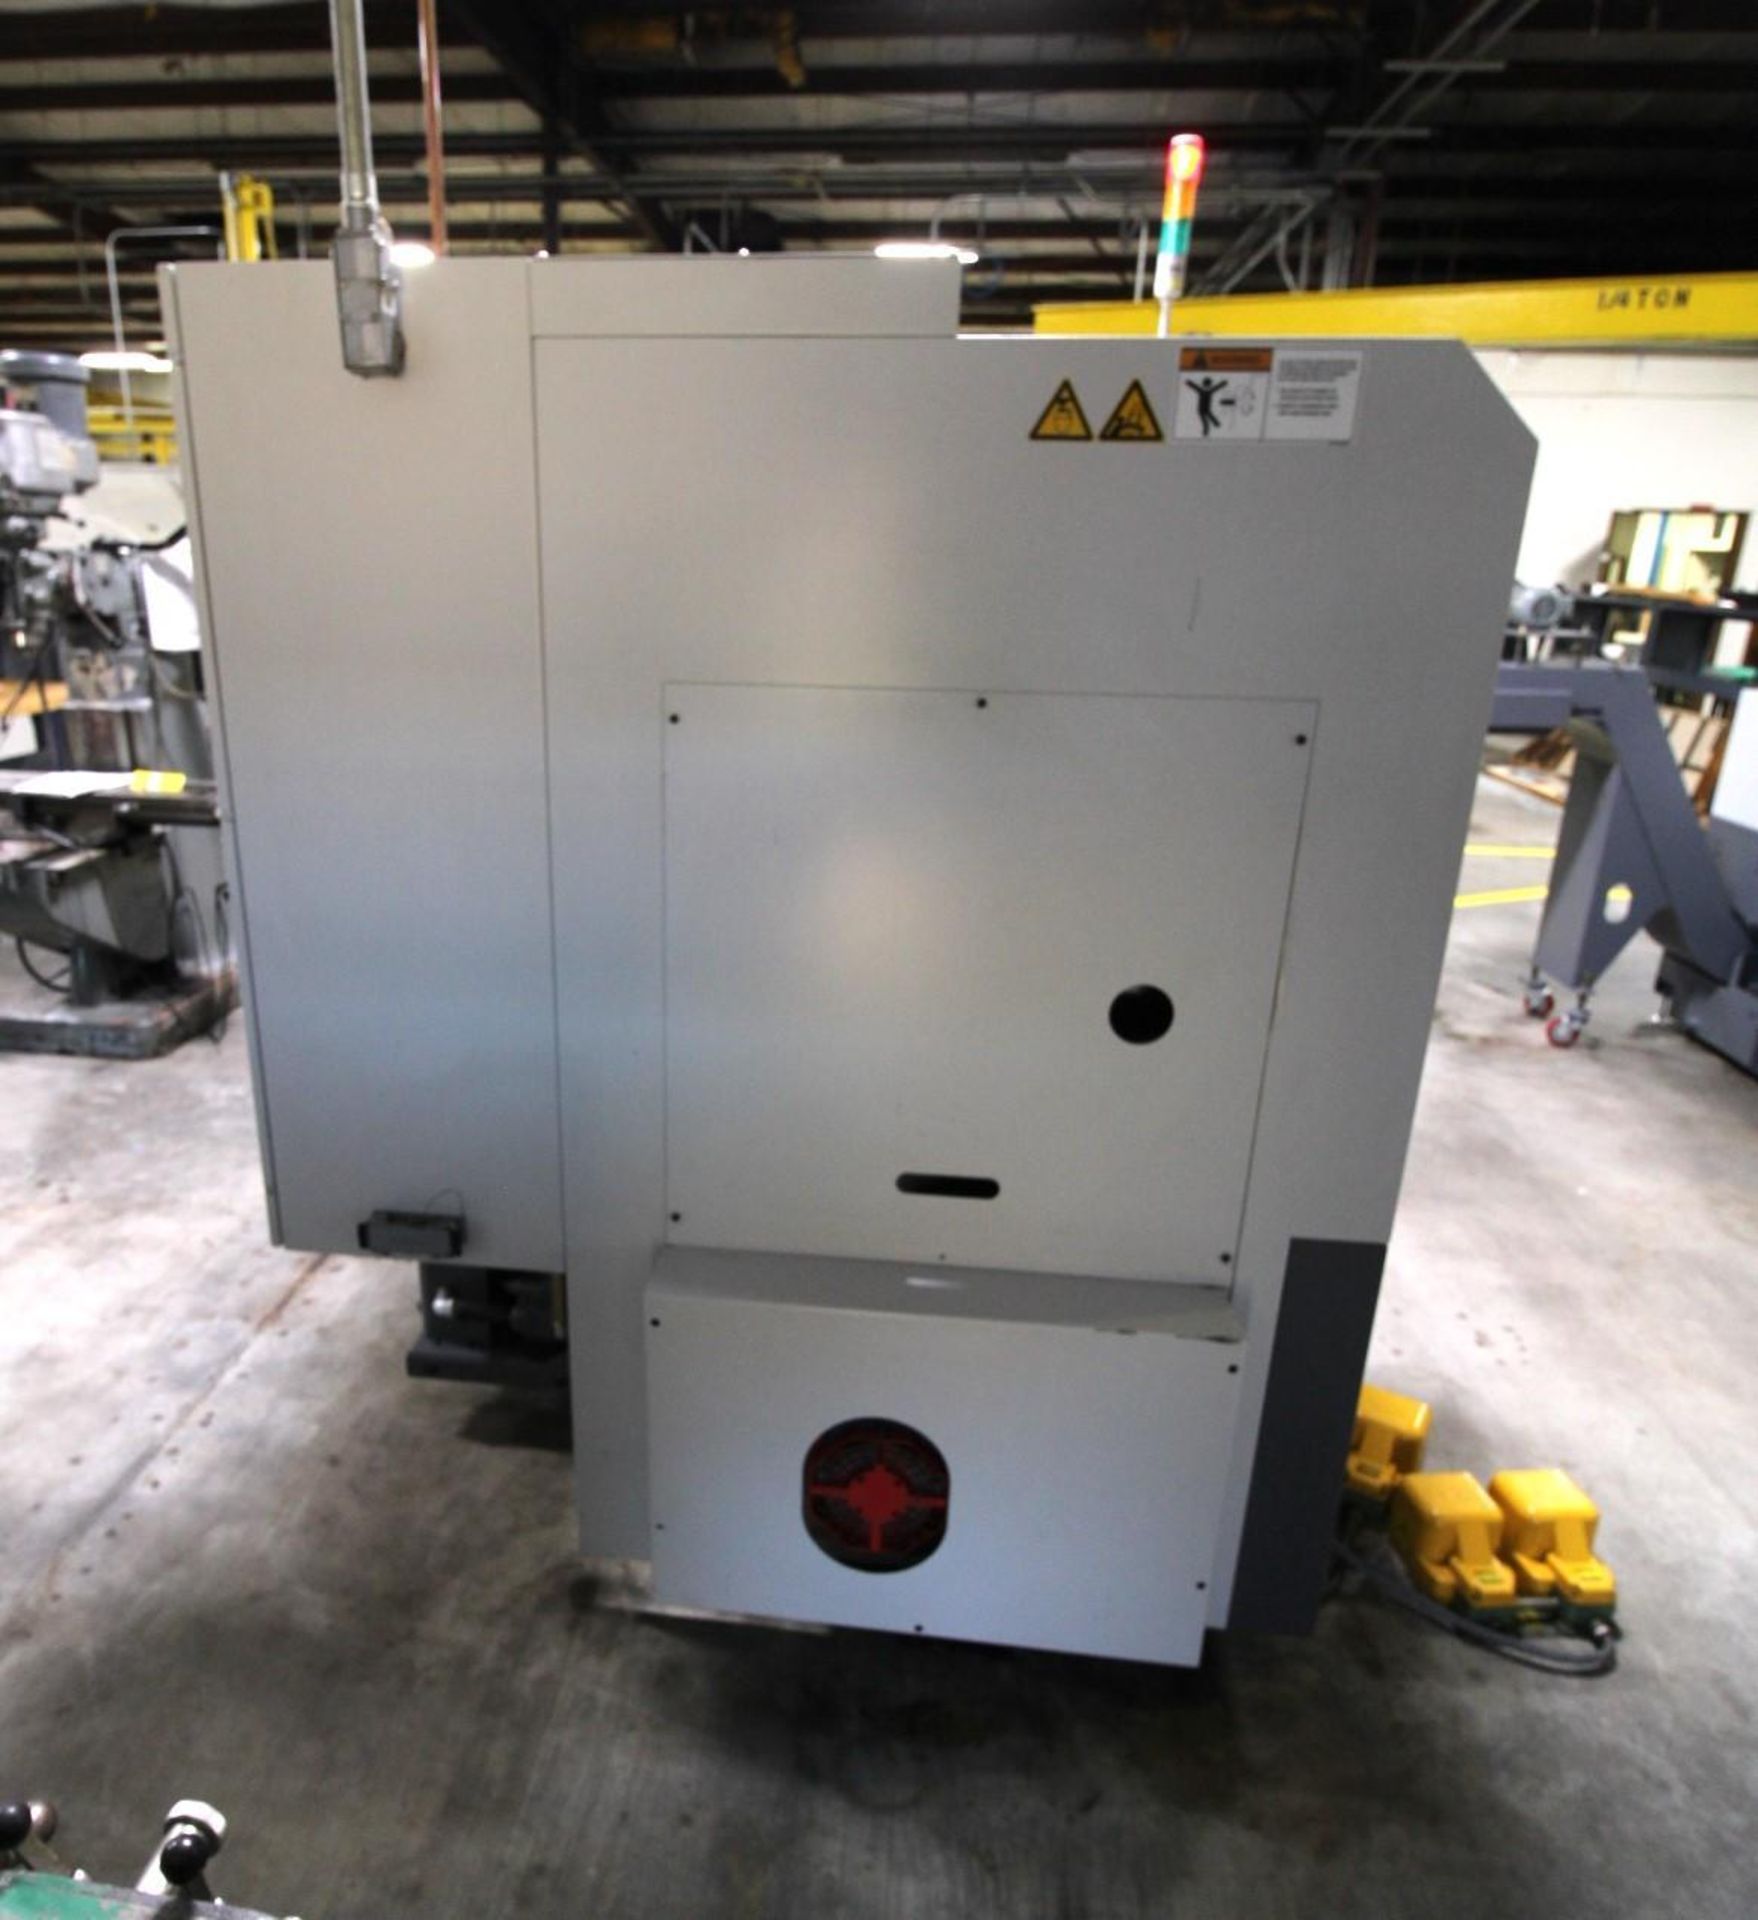 CNC LATHE, DMC MDL. DL-21LA, new 2013, installed as new in 2018, Fanuc Oi-TD control, 8” chuck, 12- - Image 4 of 17